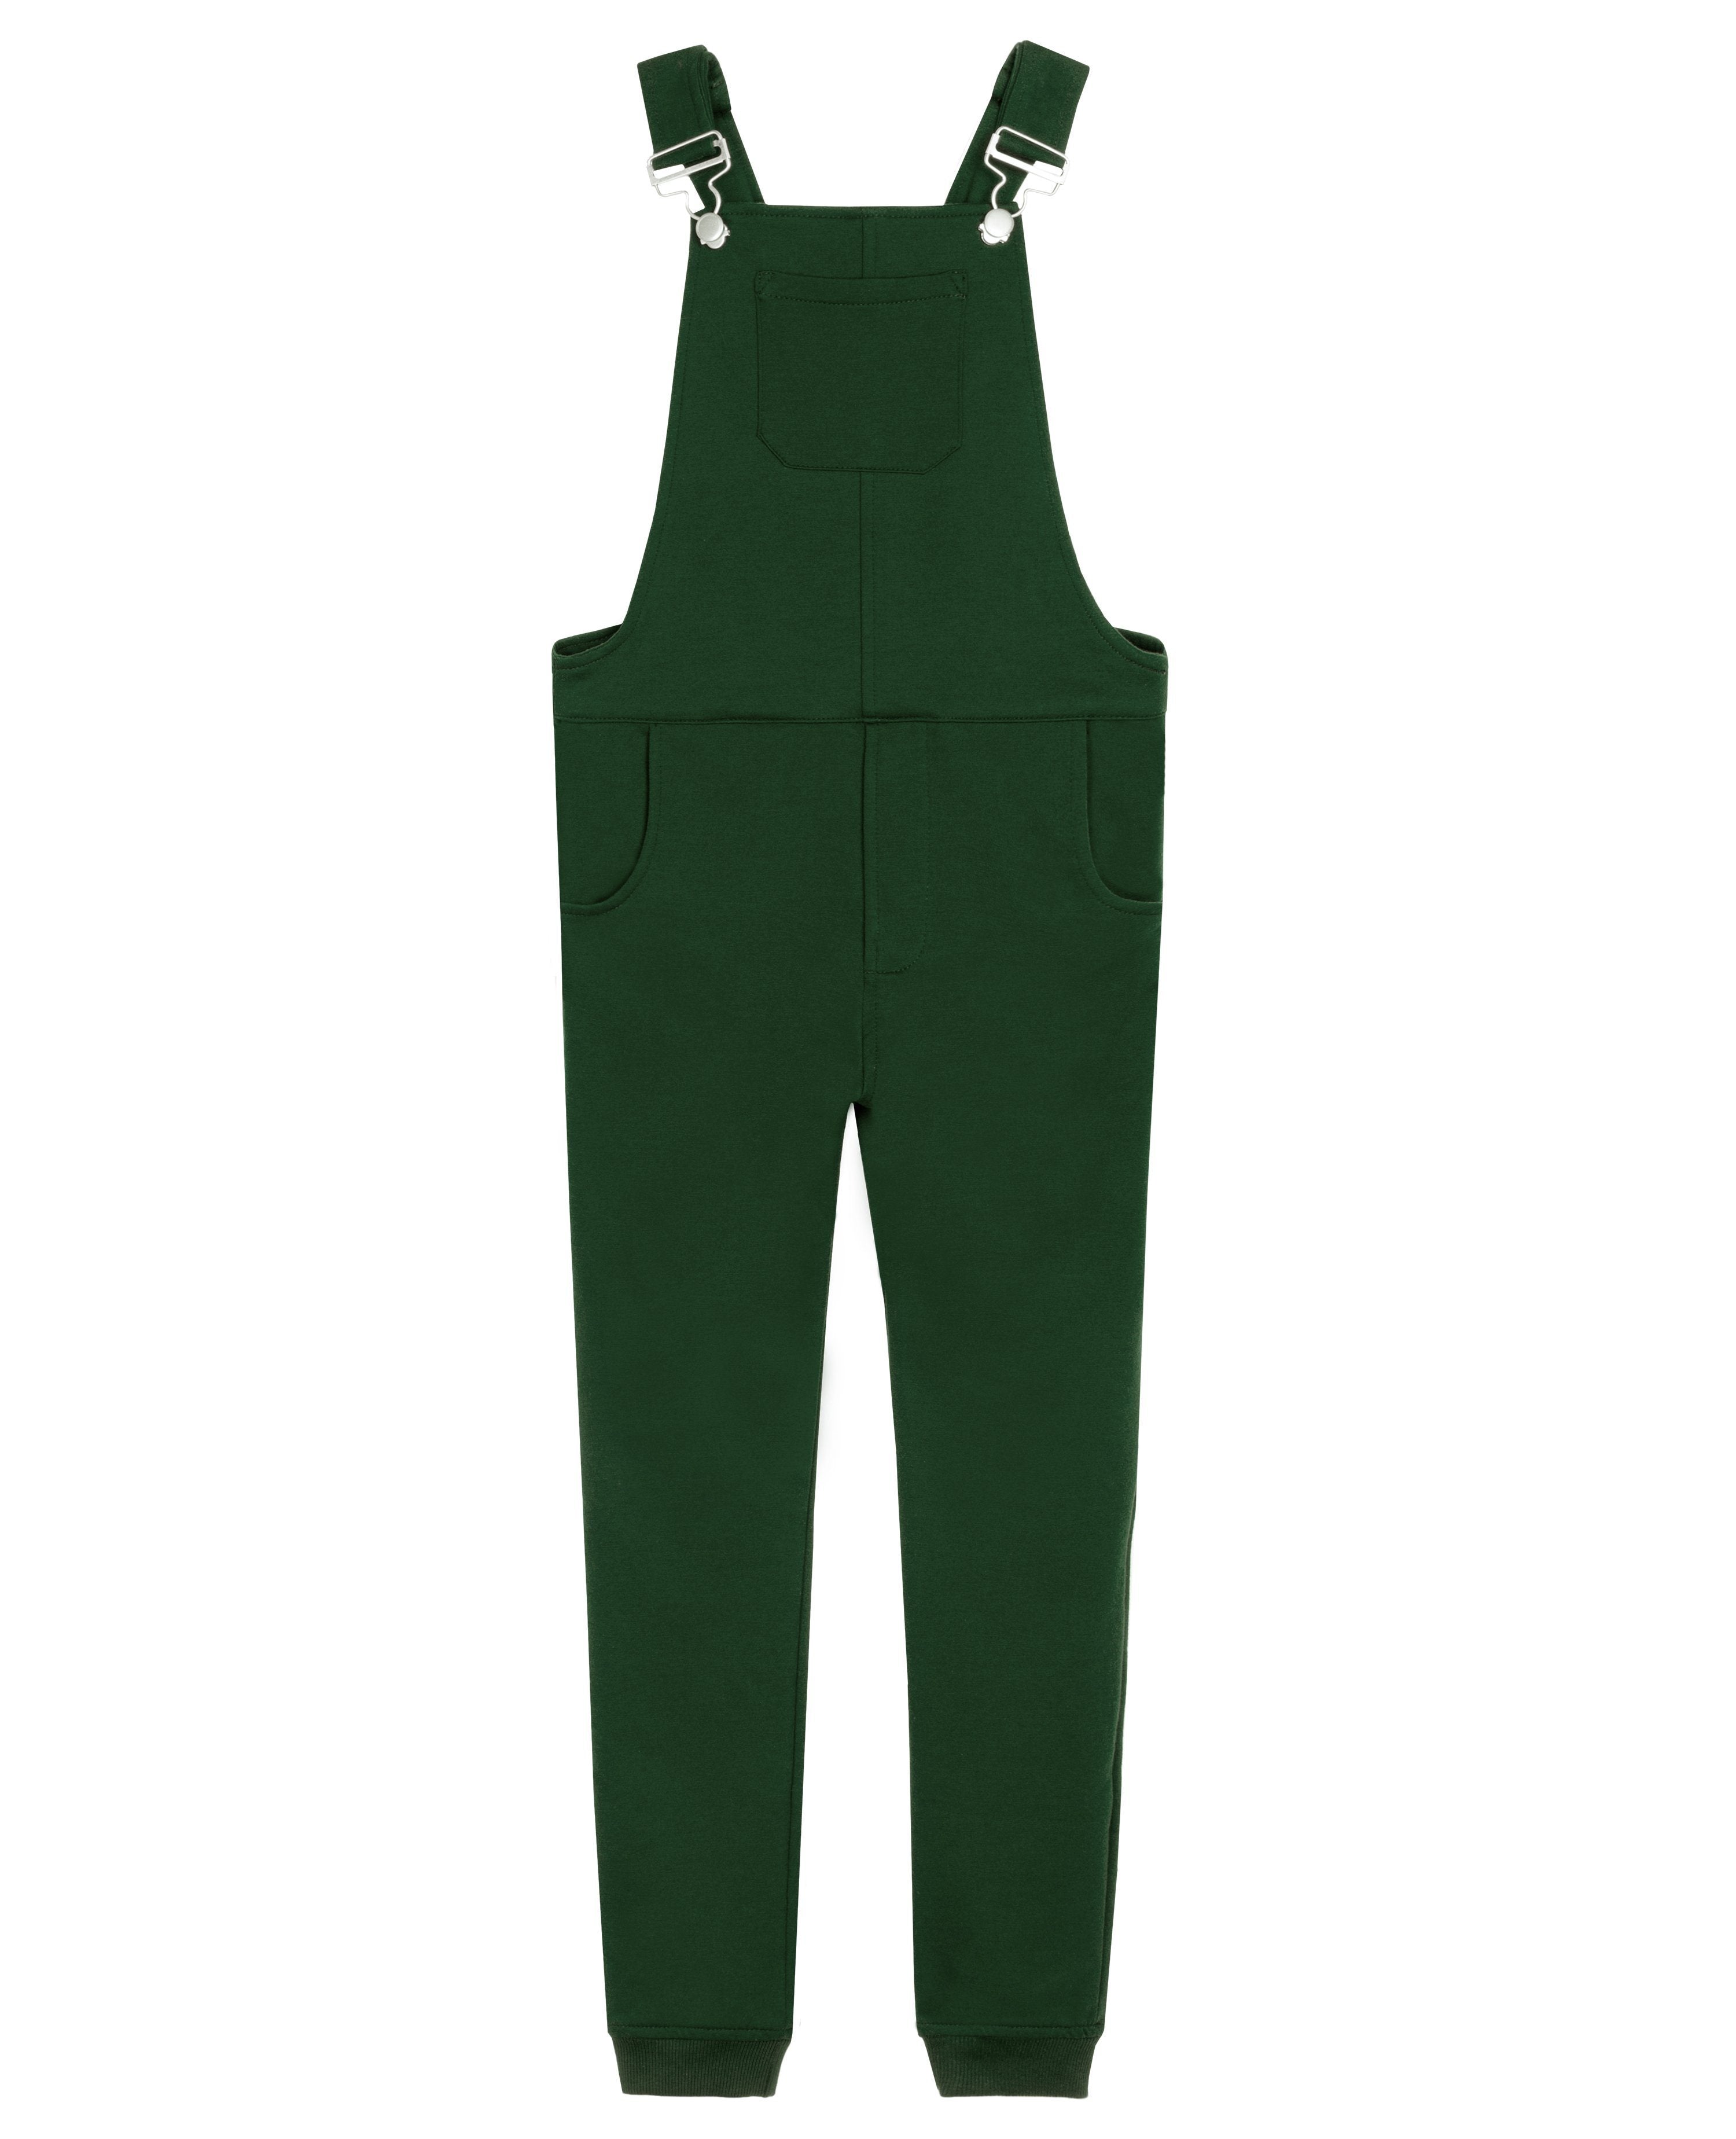 Swoveralls - Forest Green [Limited Edition!] Sweatpant Overalls The Great Fantastic